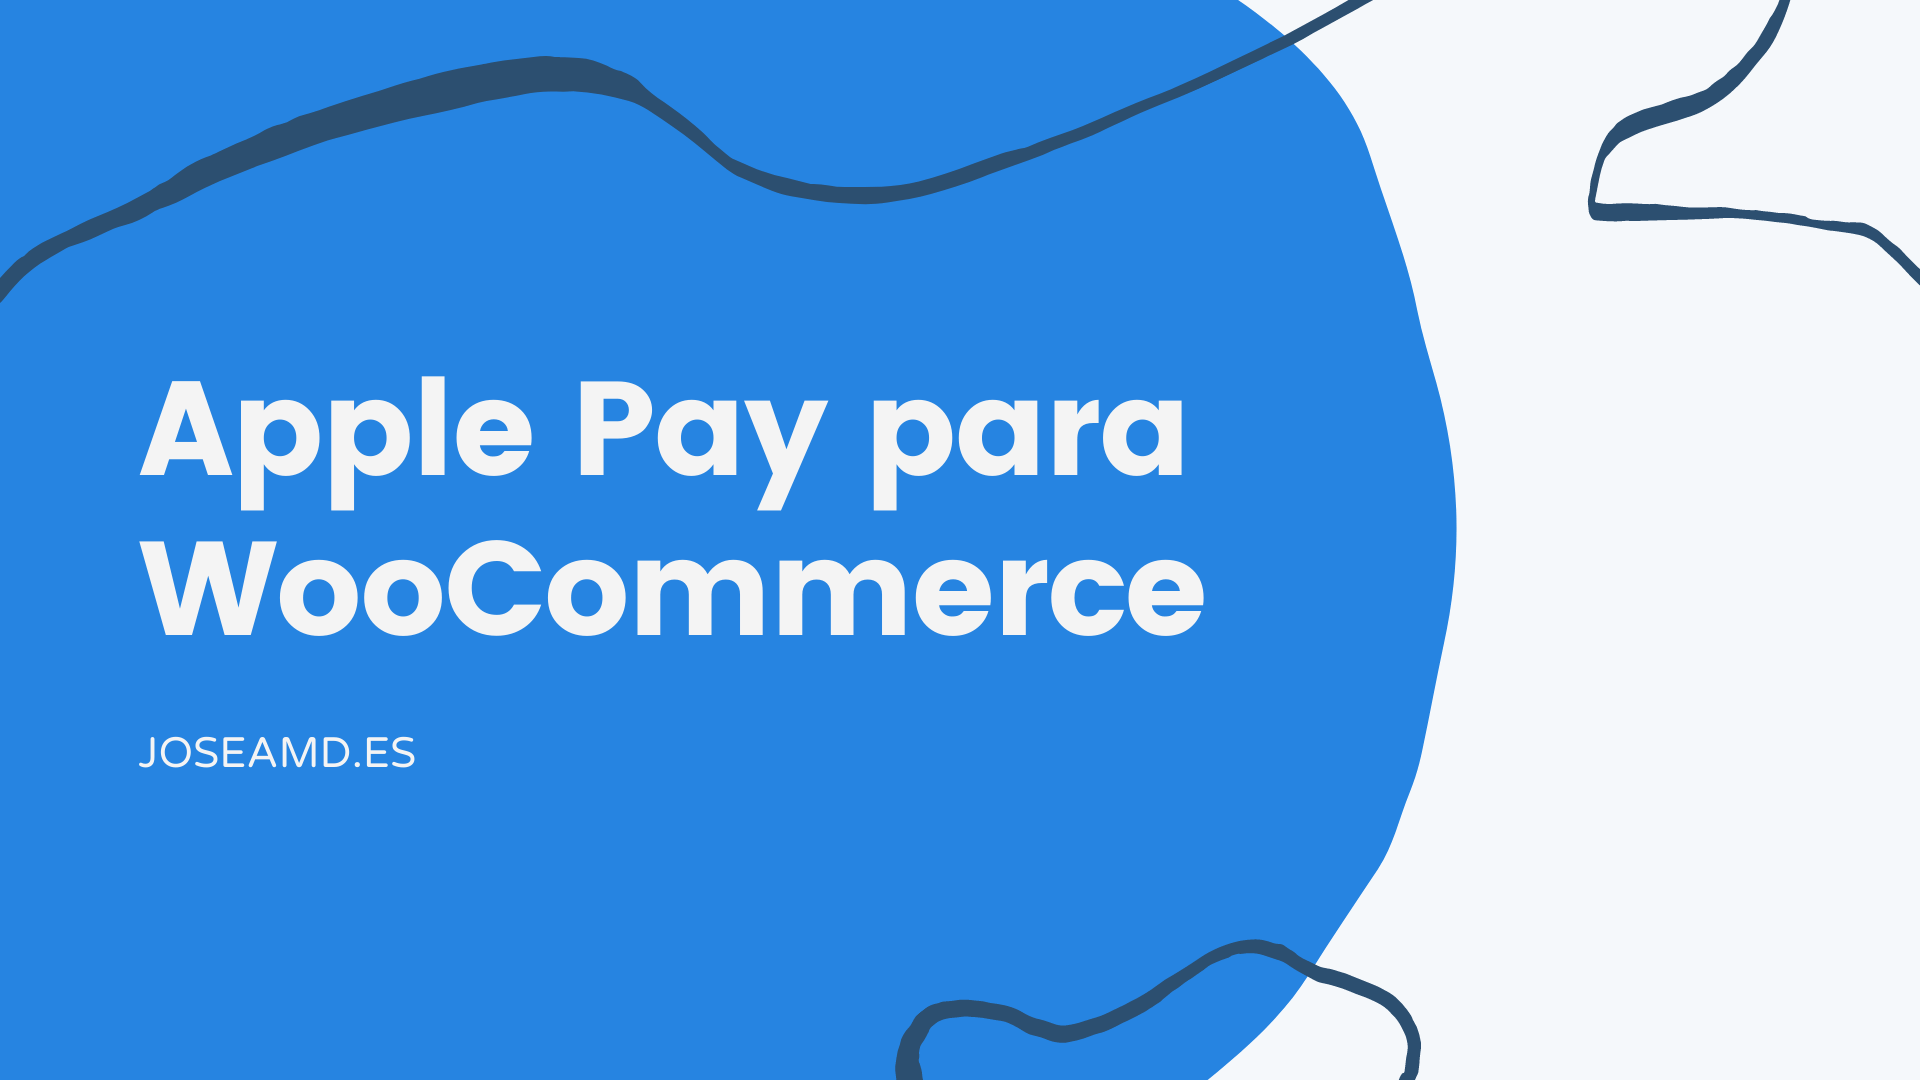 Apple Pay para WooCommerce